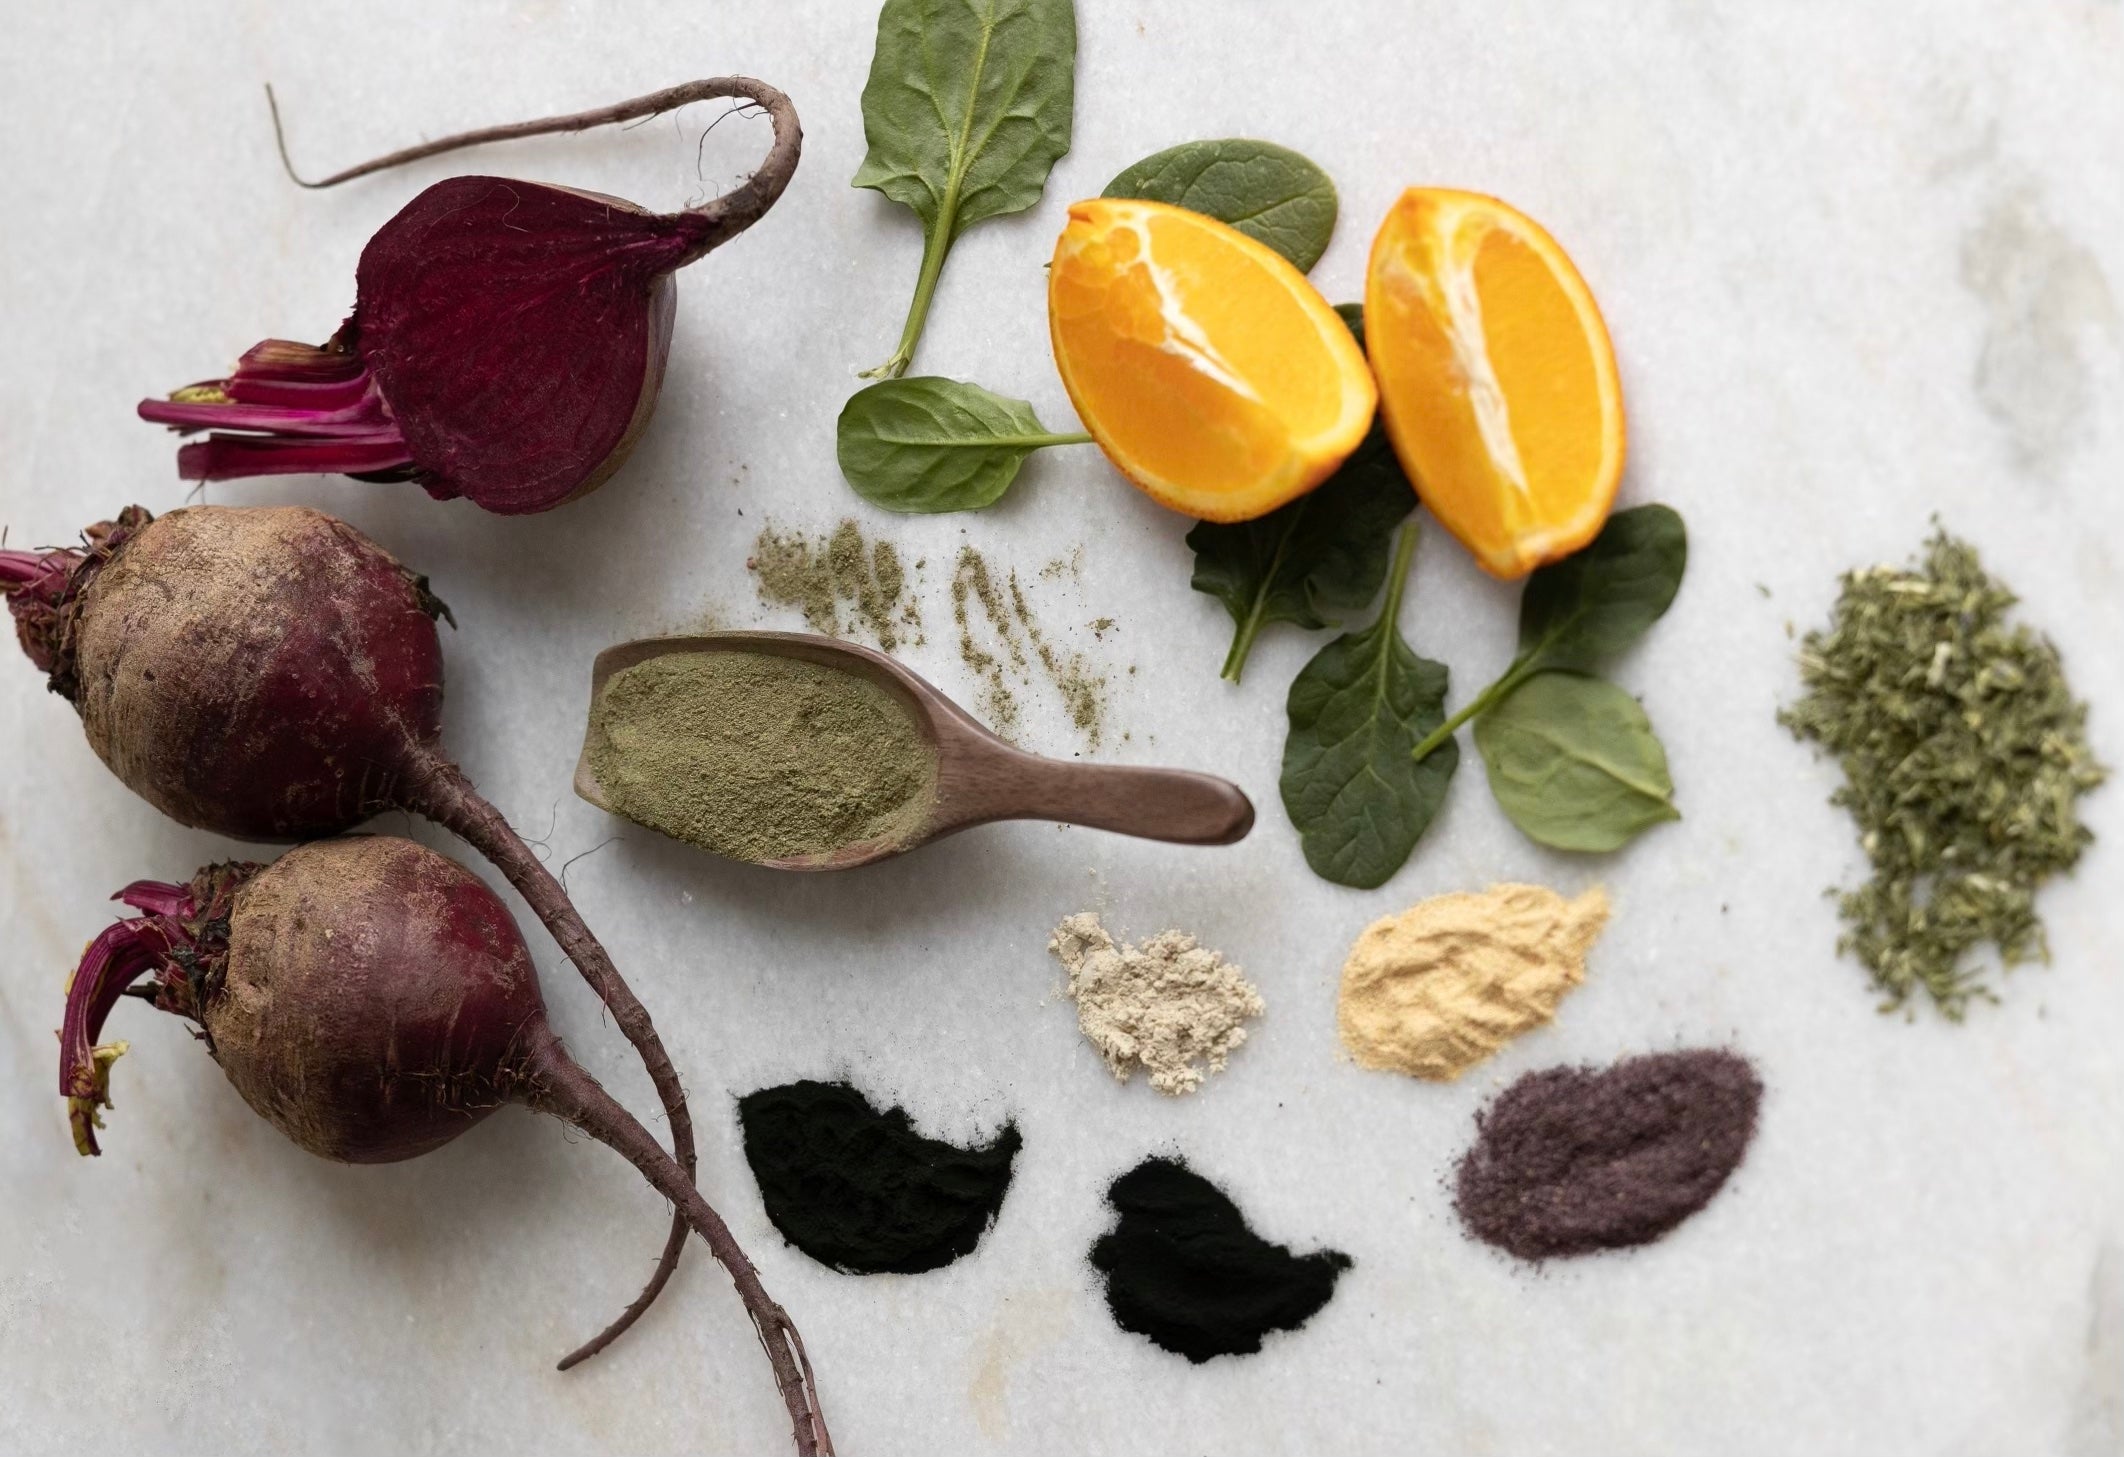 beets, oranges, spinach, and wellness powders scattered around